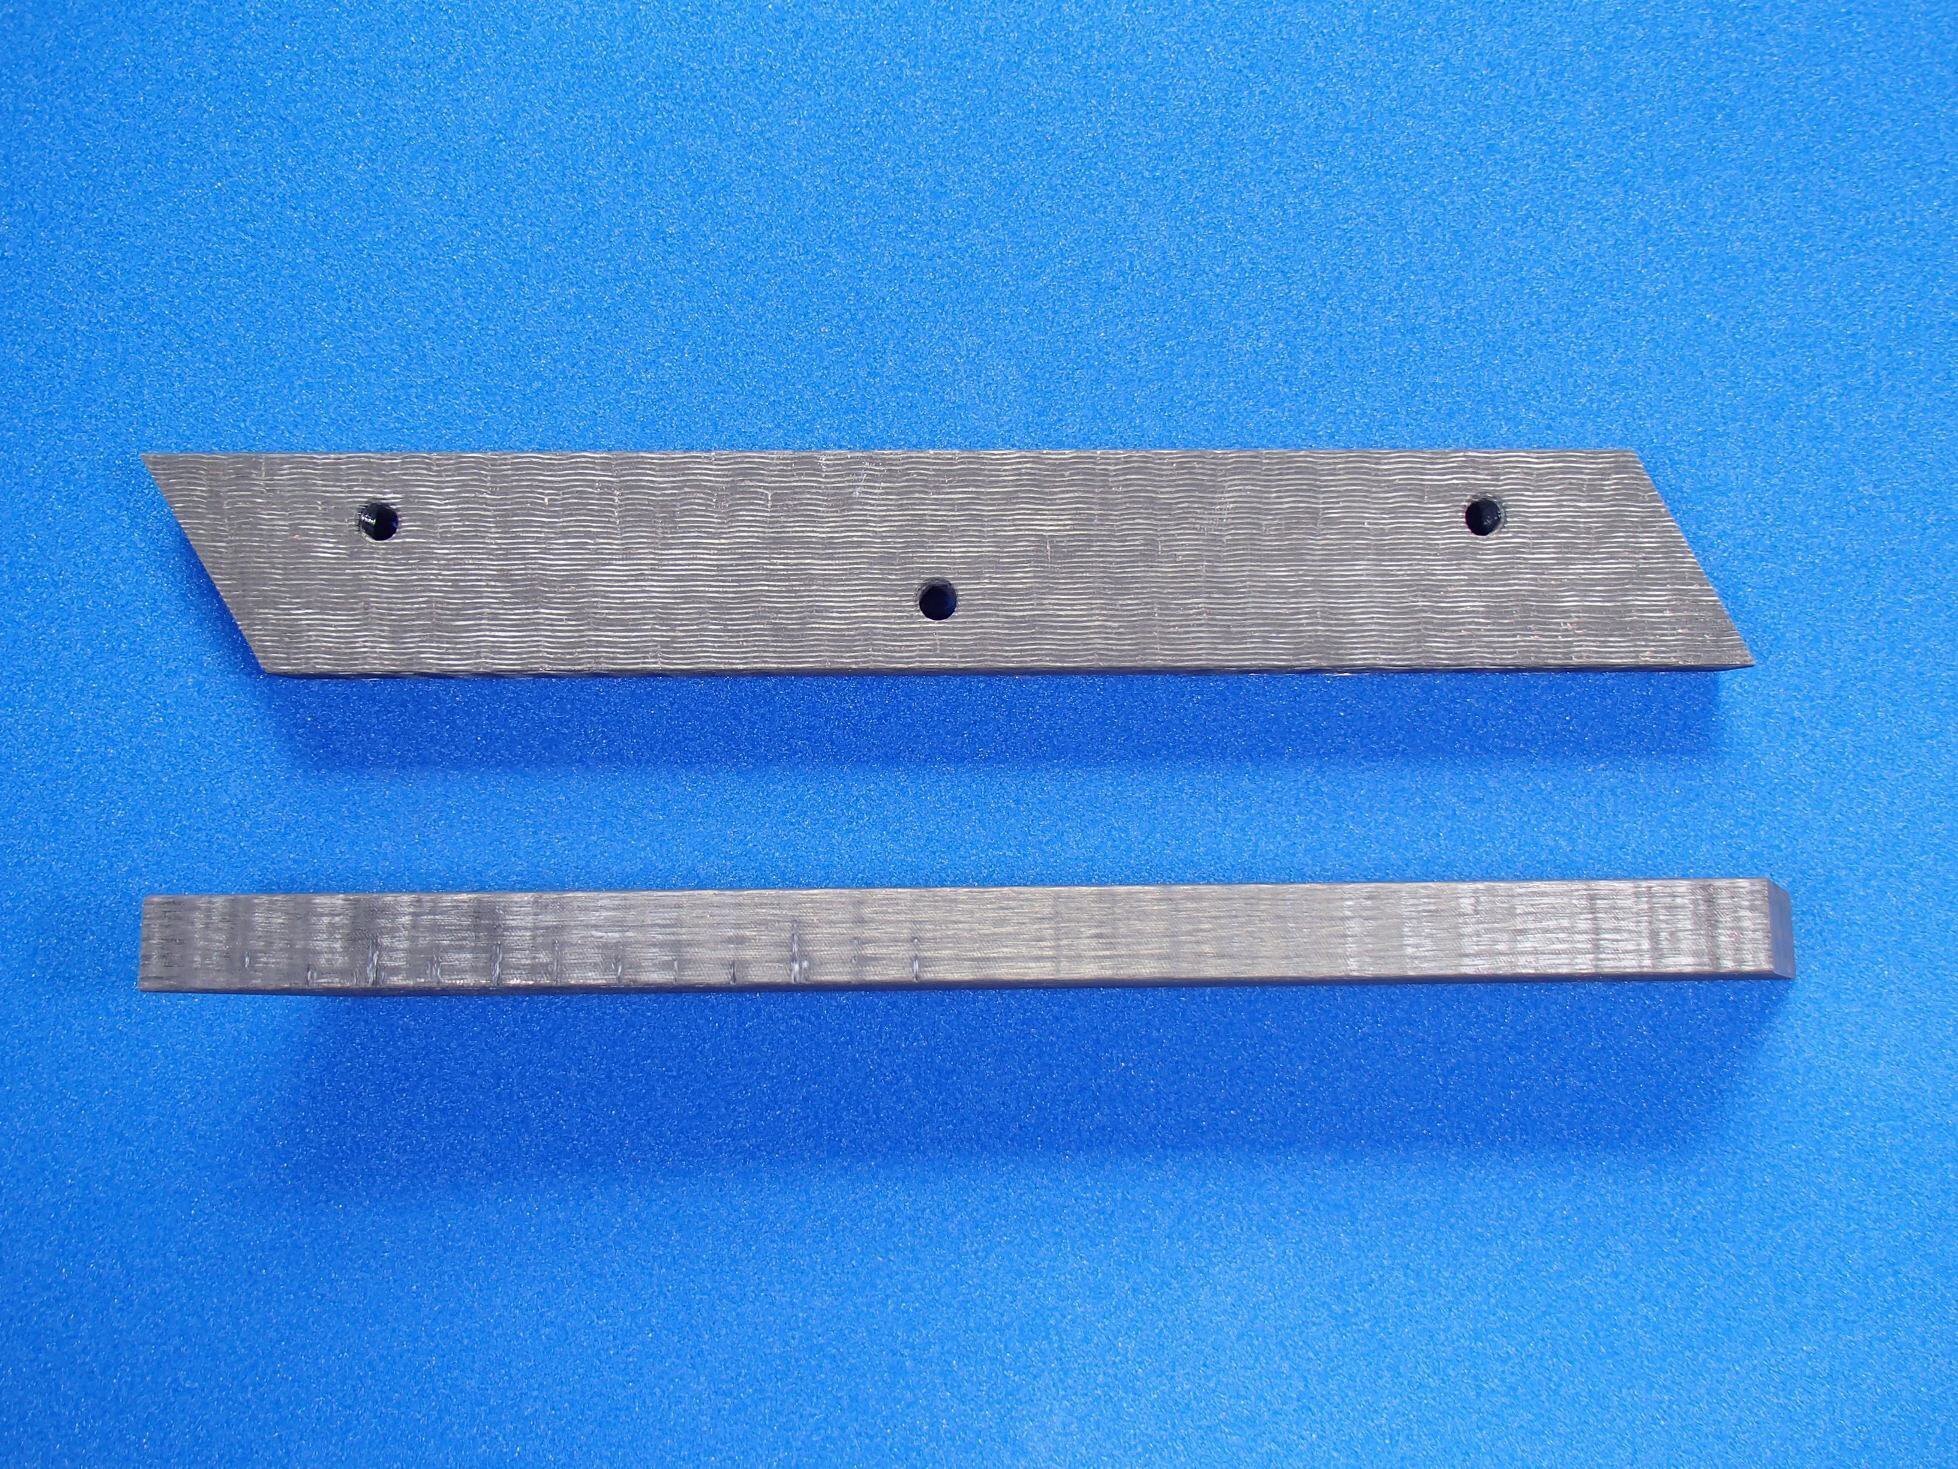 Sintered contact strip material made from C/C composite impregnated with copper alloy used for electric trains